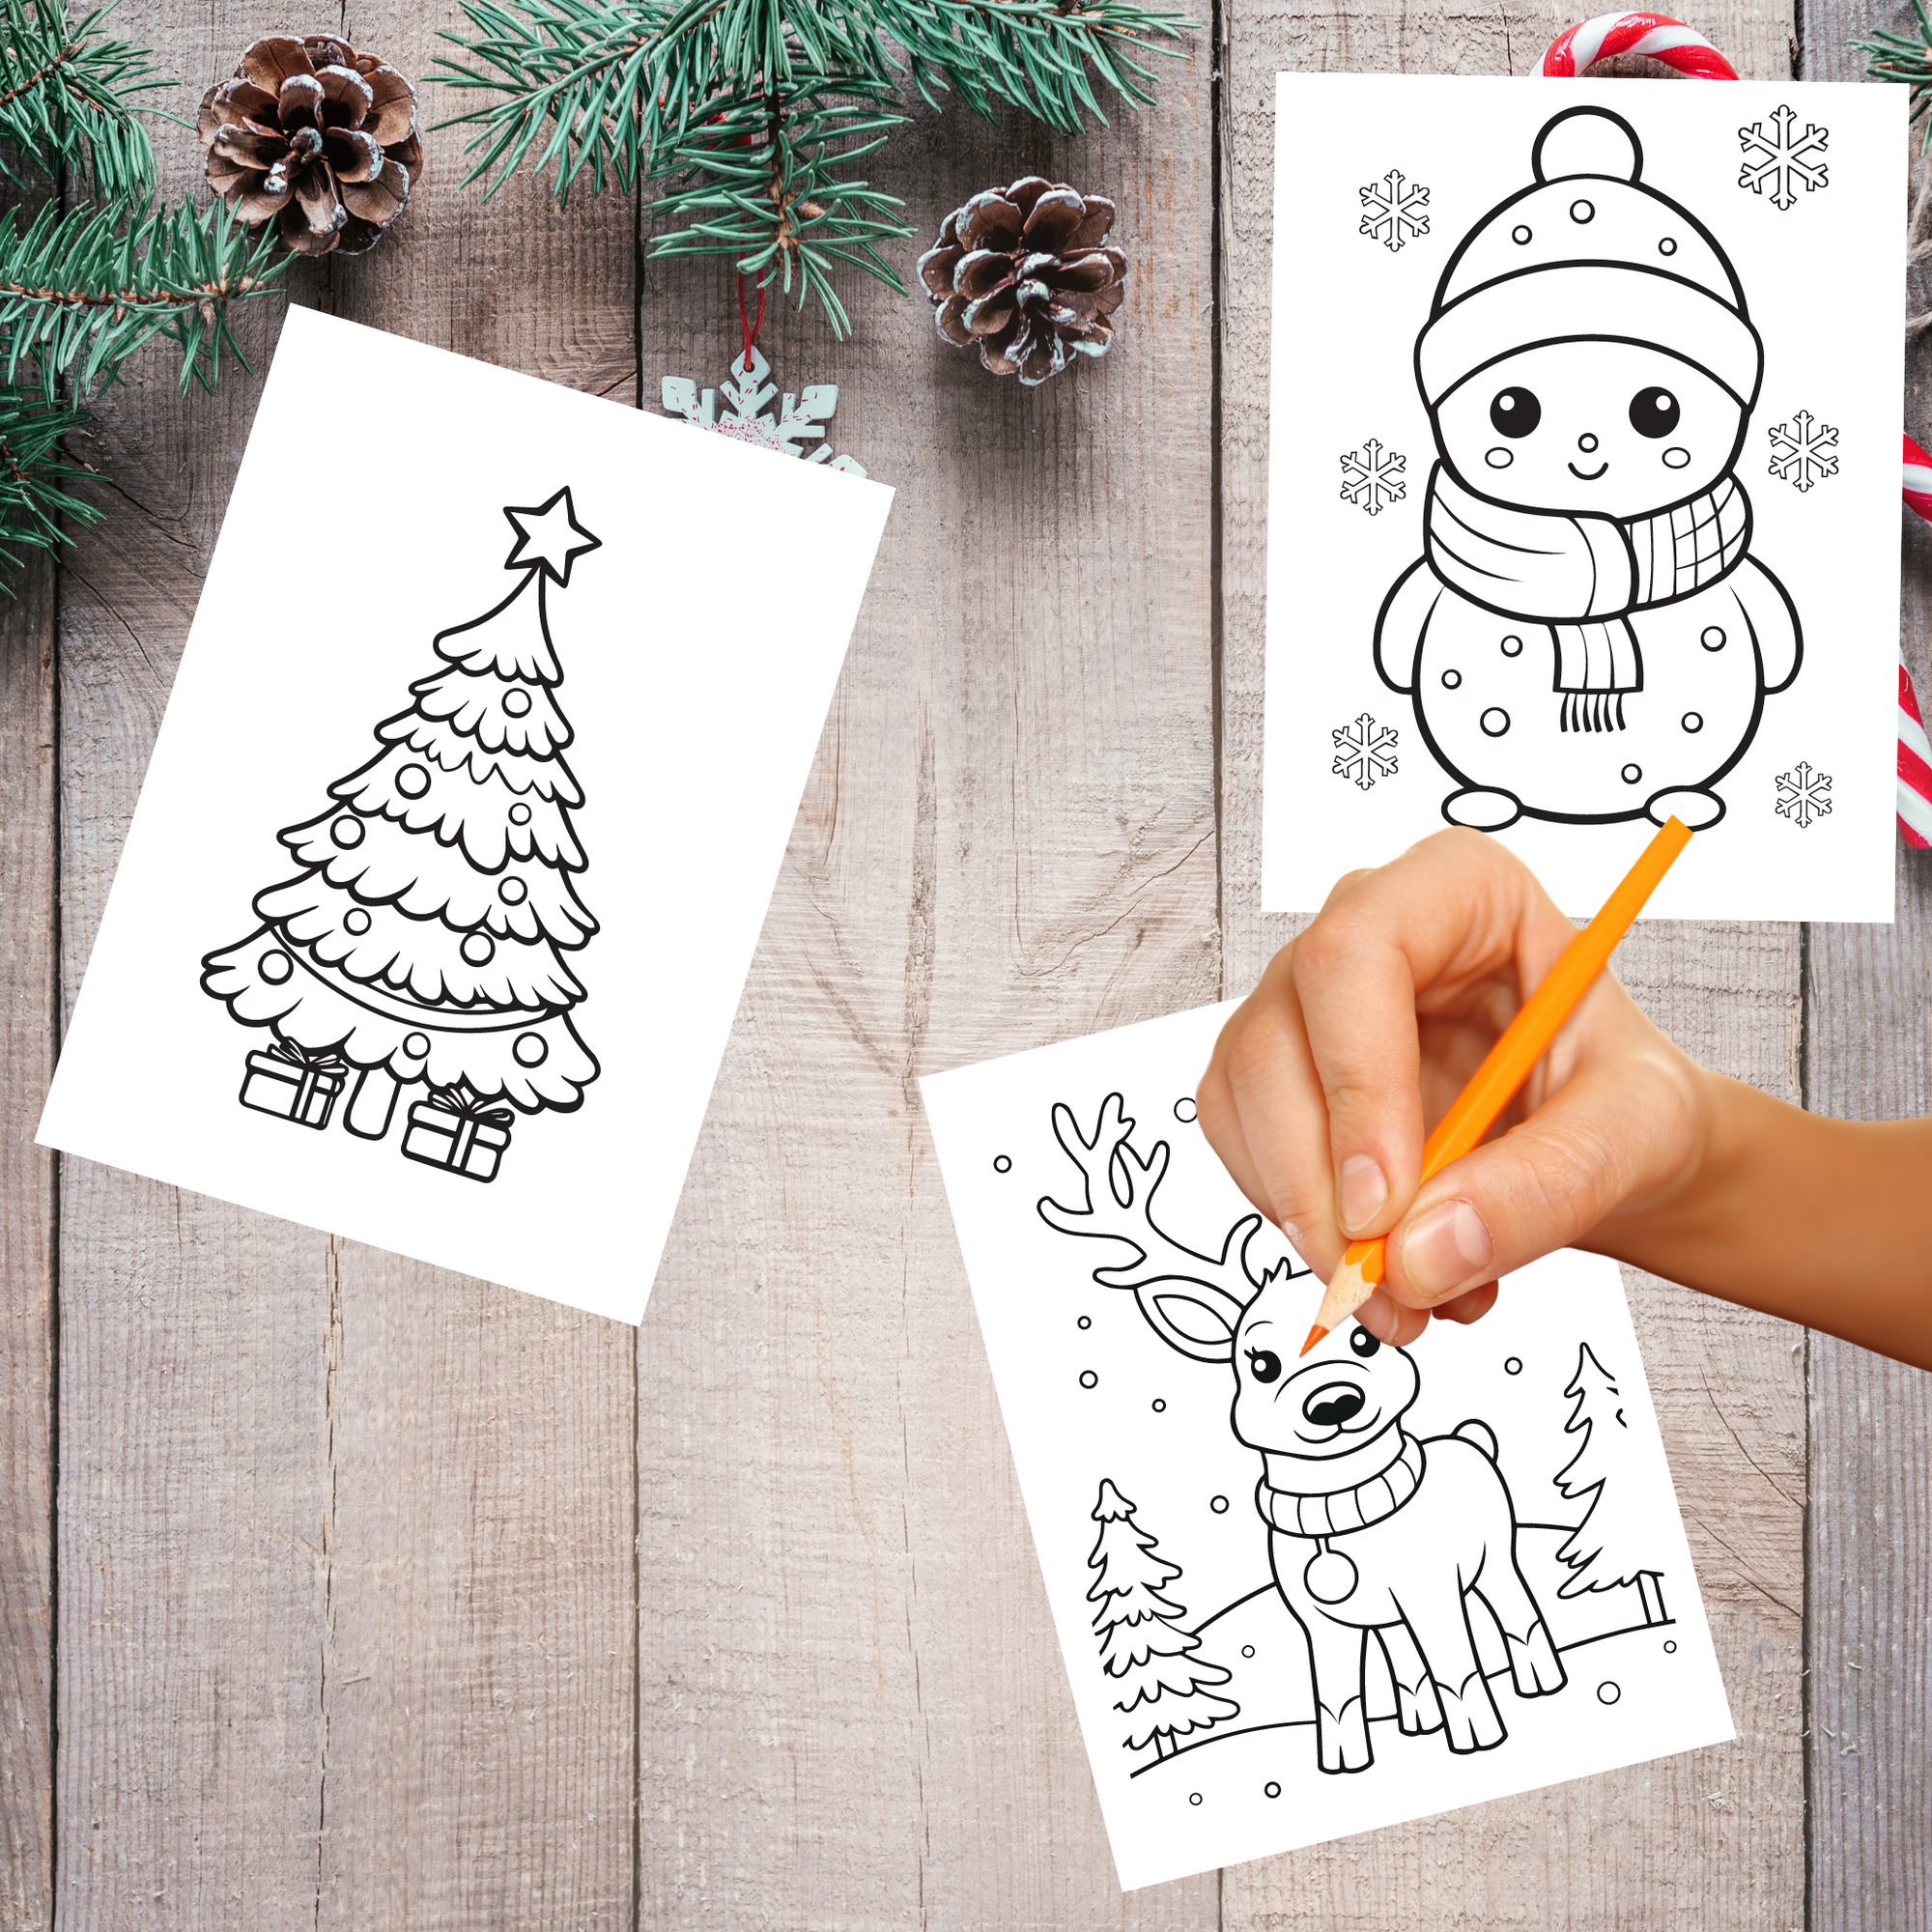 Experience 12 Days of Christmas Activity Downloads for FREE!